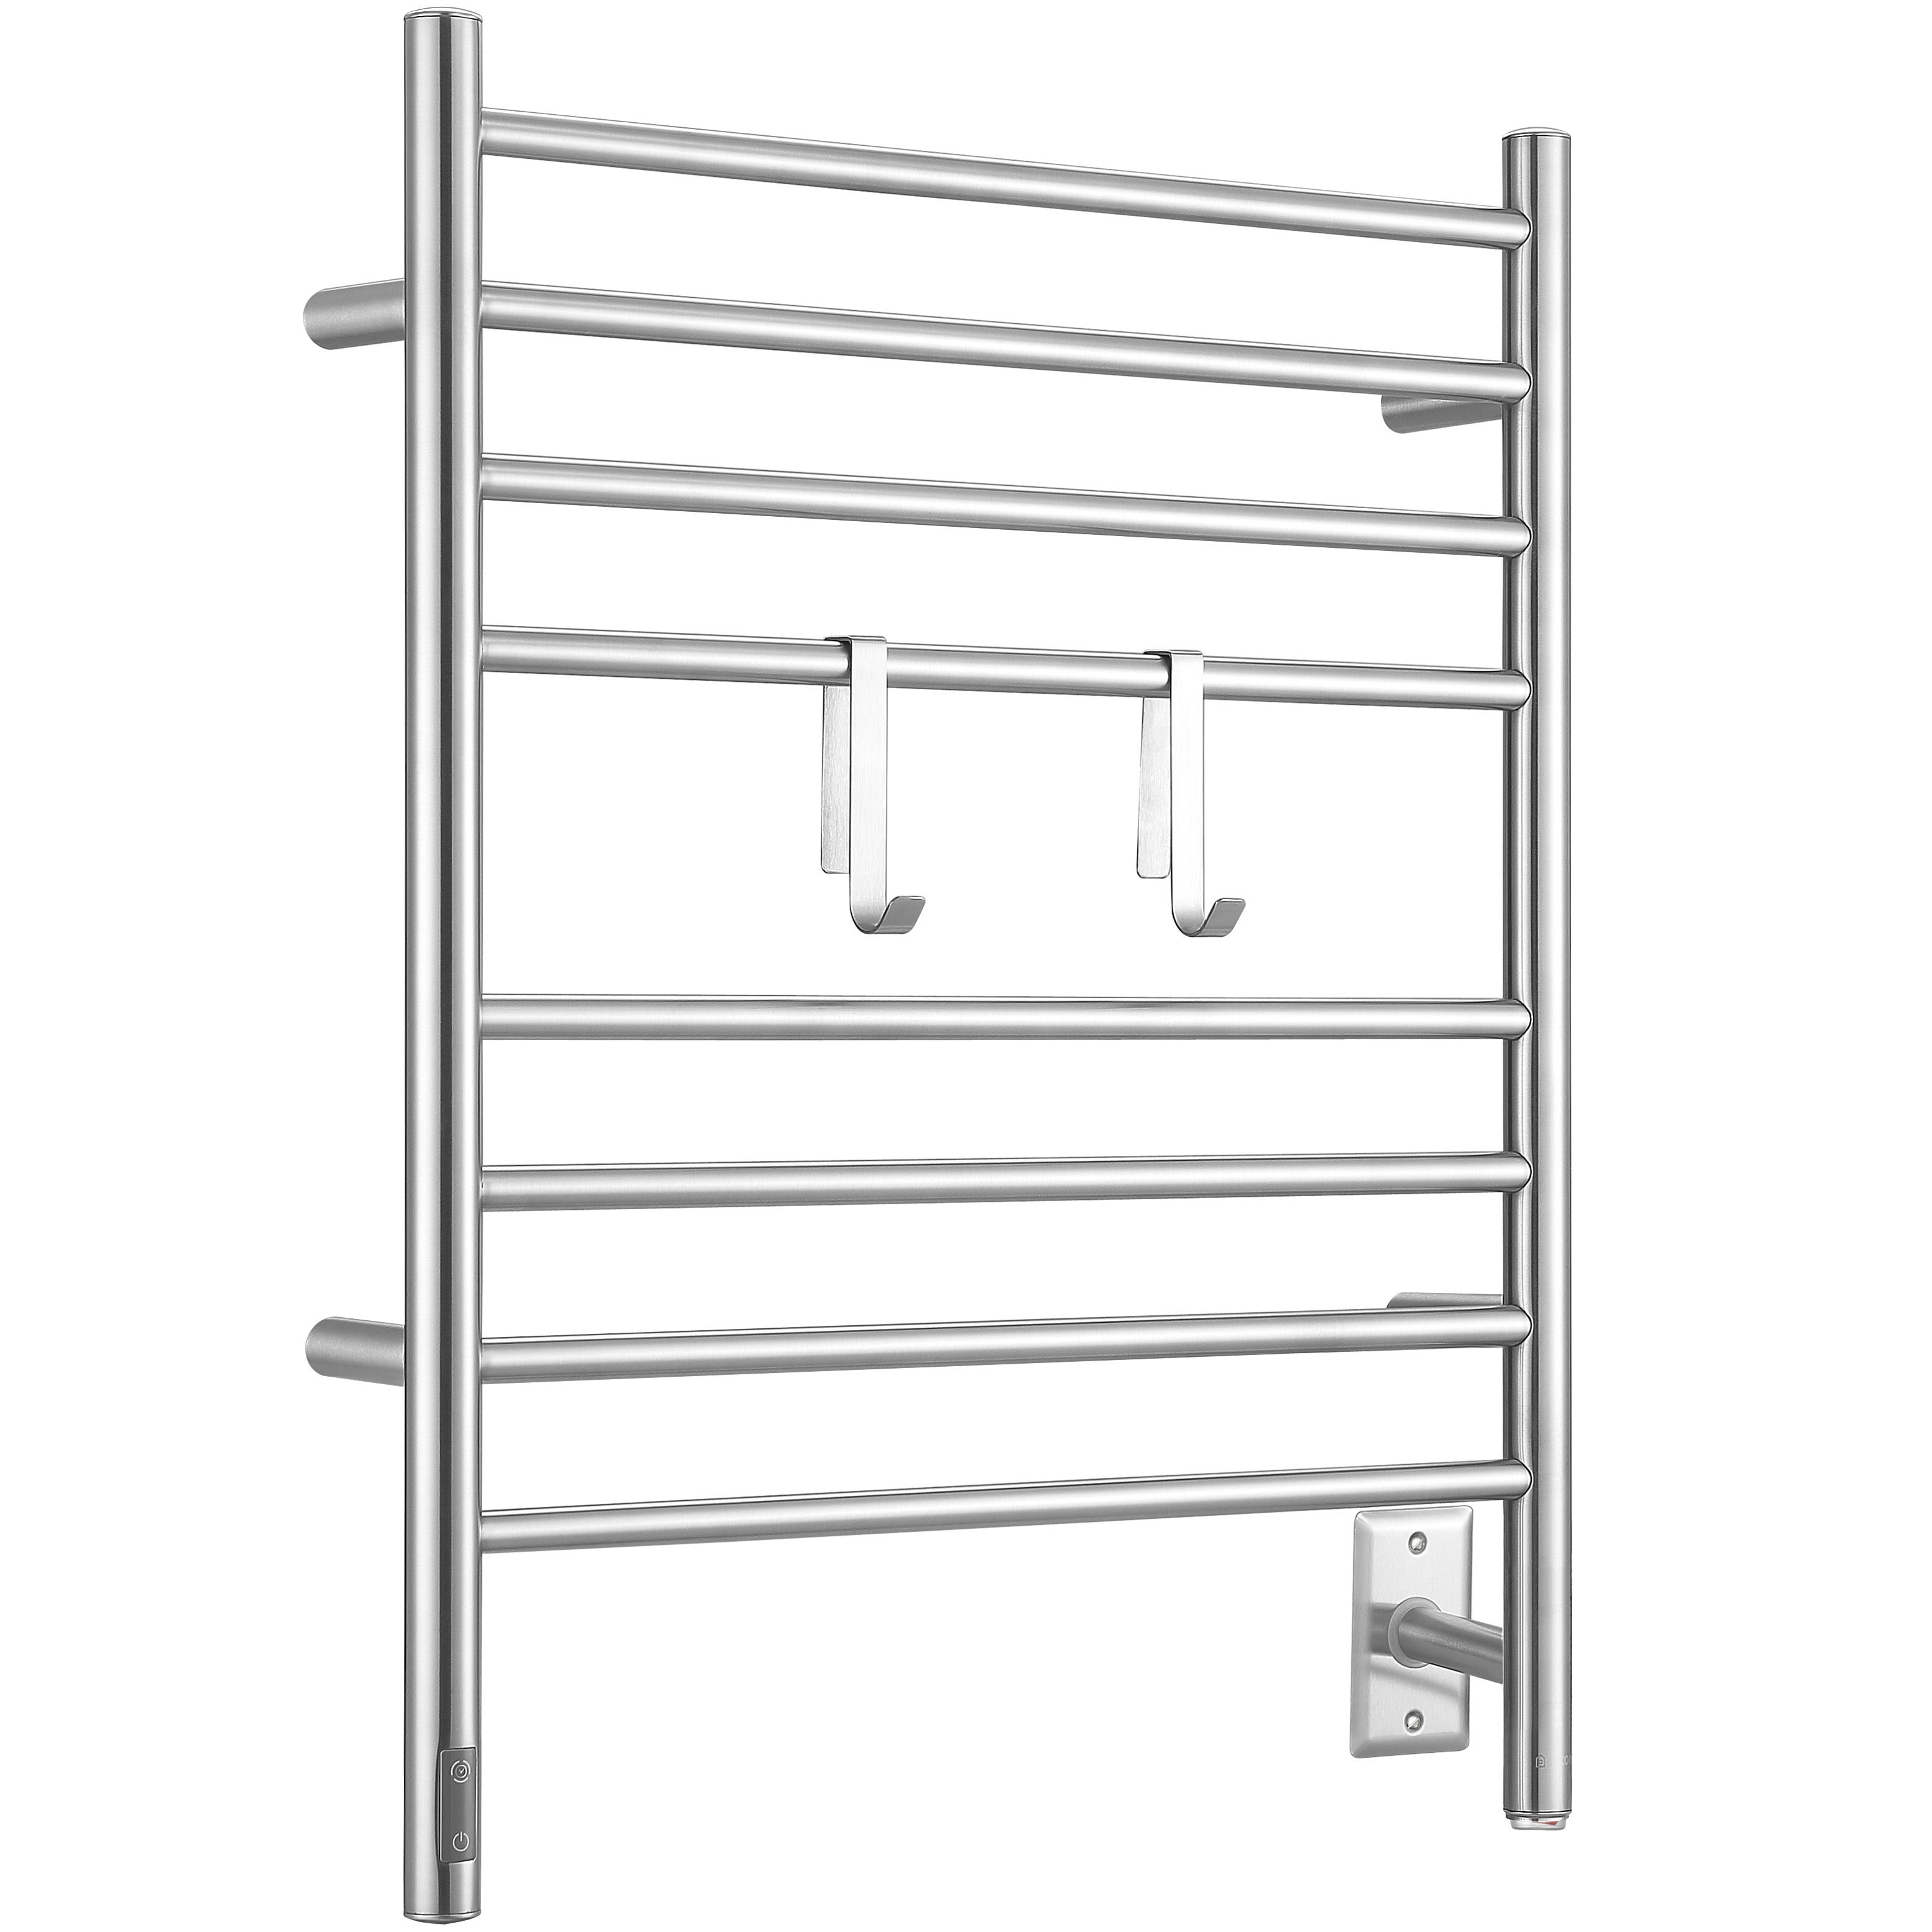 Ancona Prestige OBT 8-Bar Wall Mounted Towel Warmer with 2 Adjustable Hooks and Integrated On-Board Timer in Brushed Stainless Steel